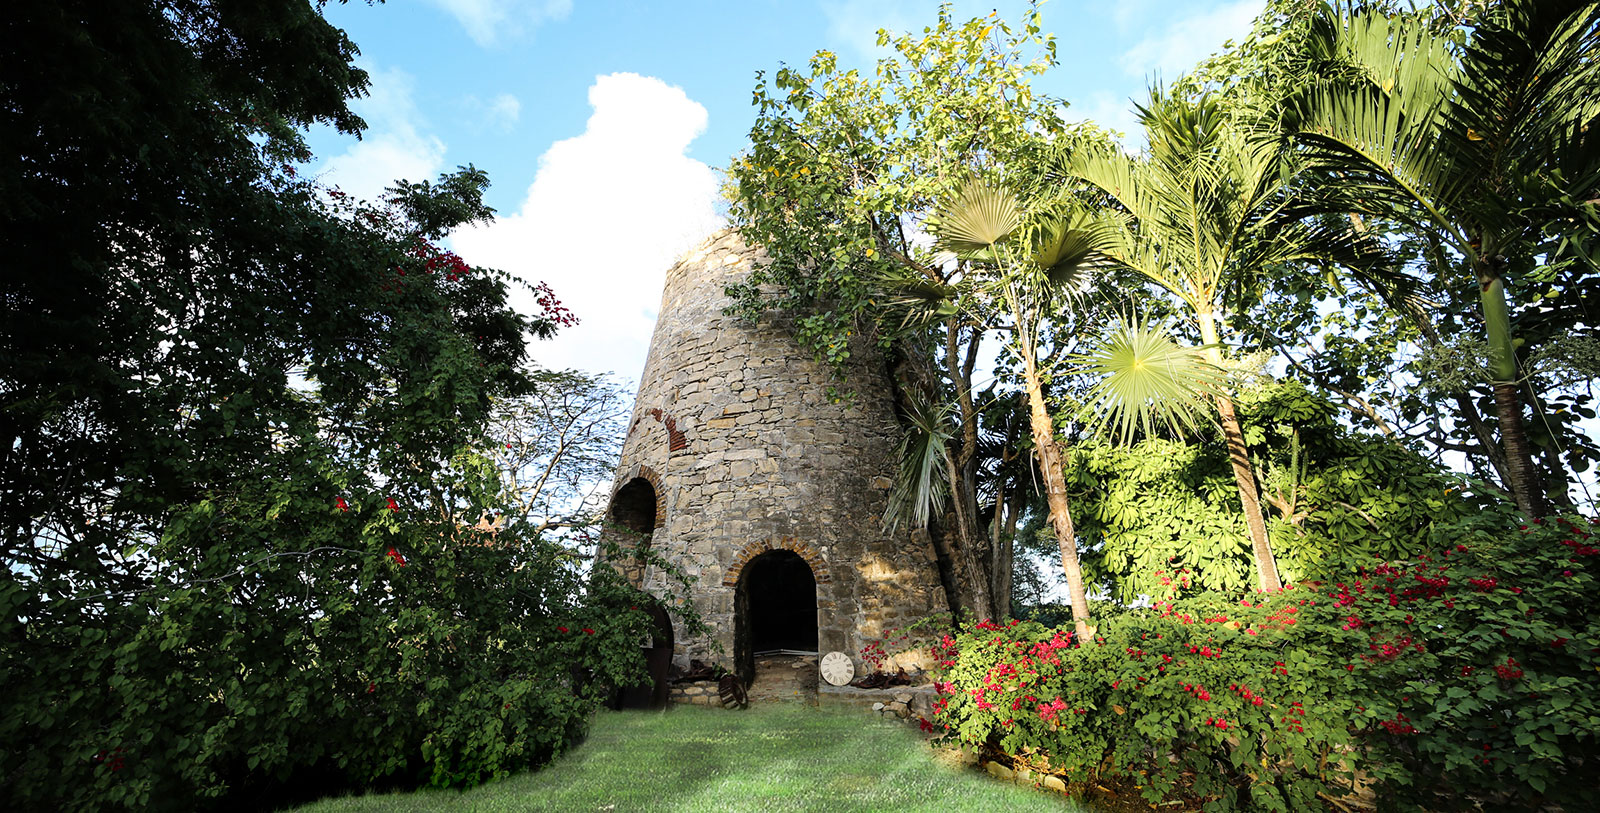 Visit St. John’s, the capital city home to the Museum of Antigua and Barbuda, St. John’s Cathedral, and Fort James.